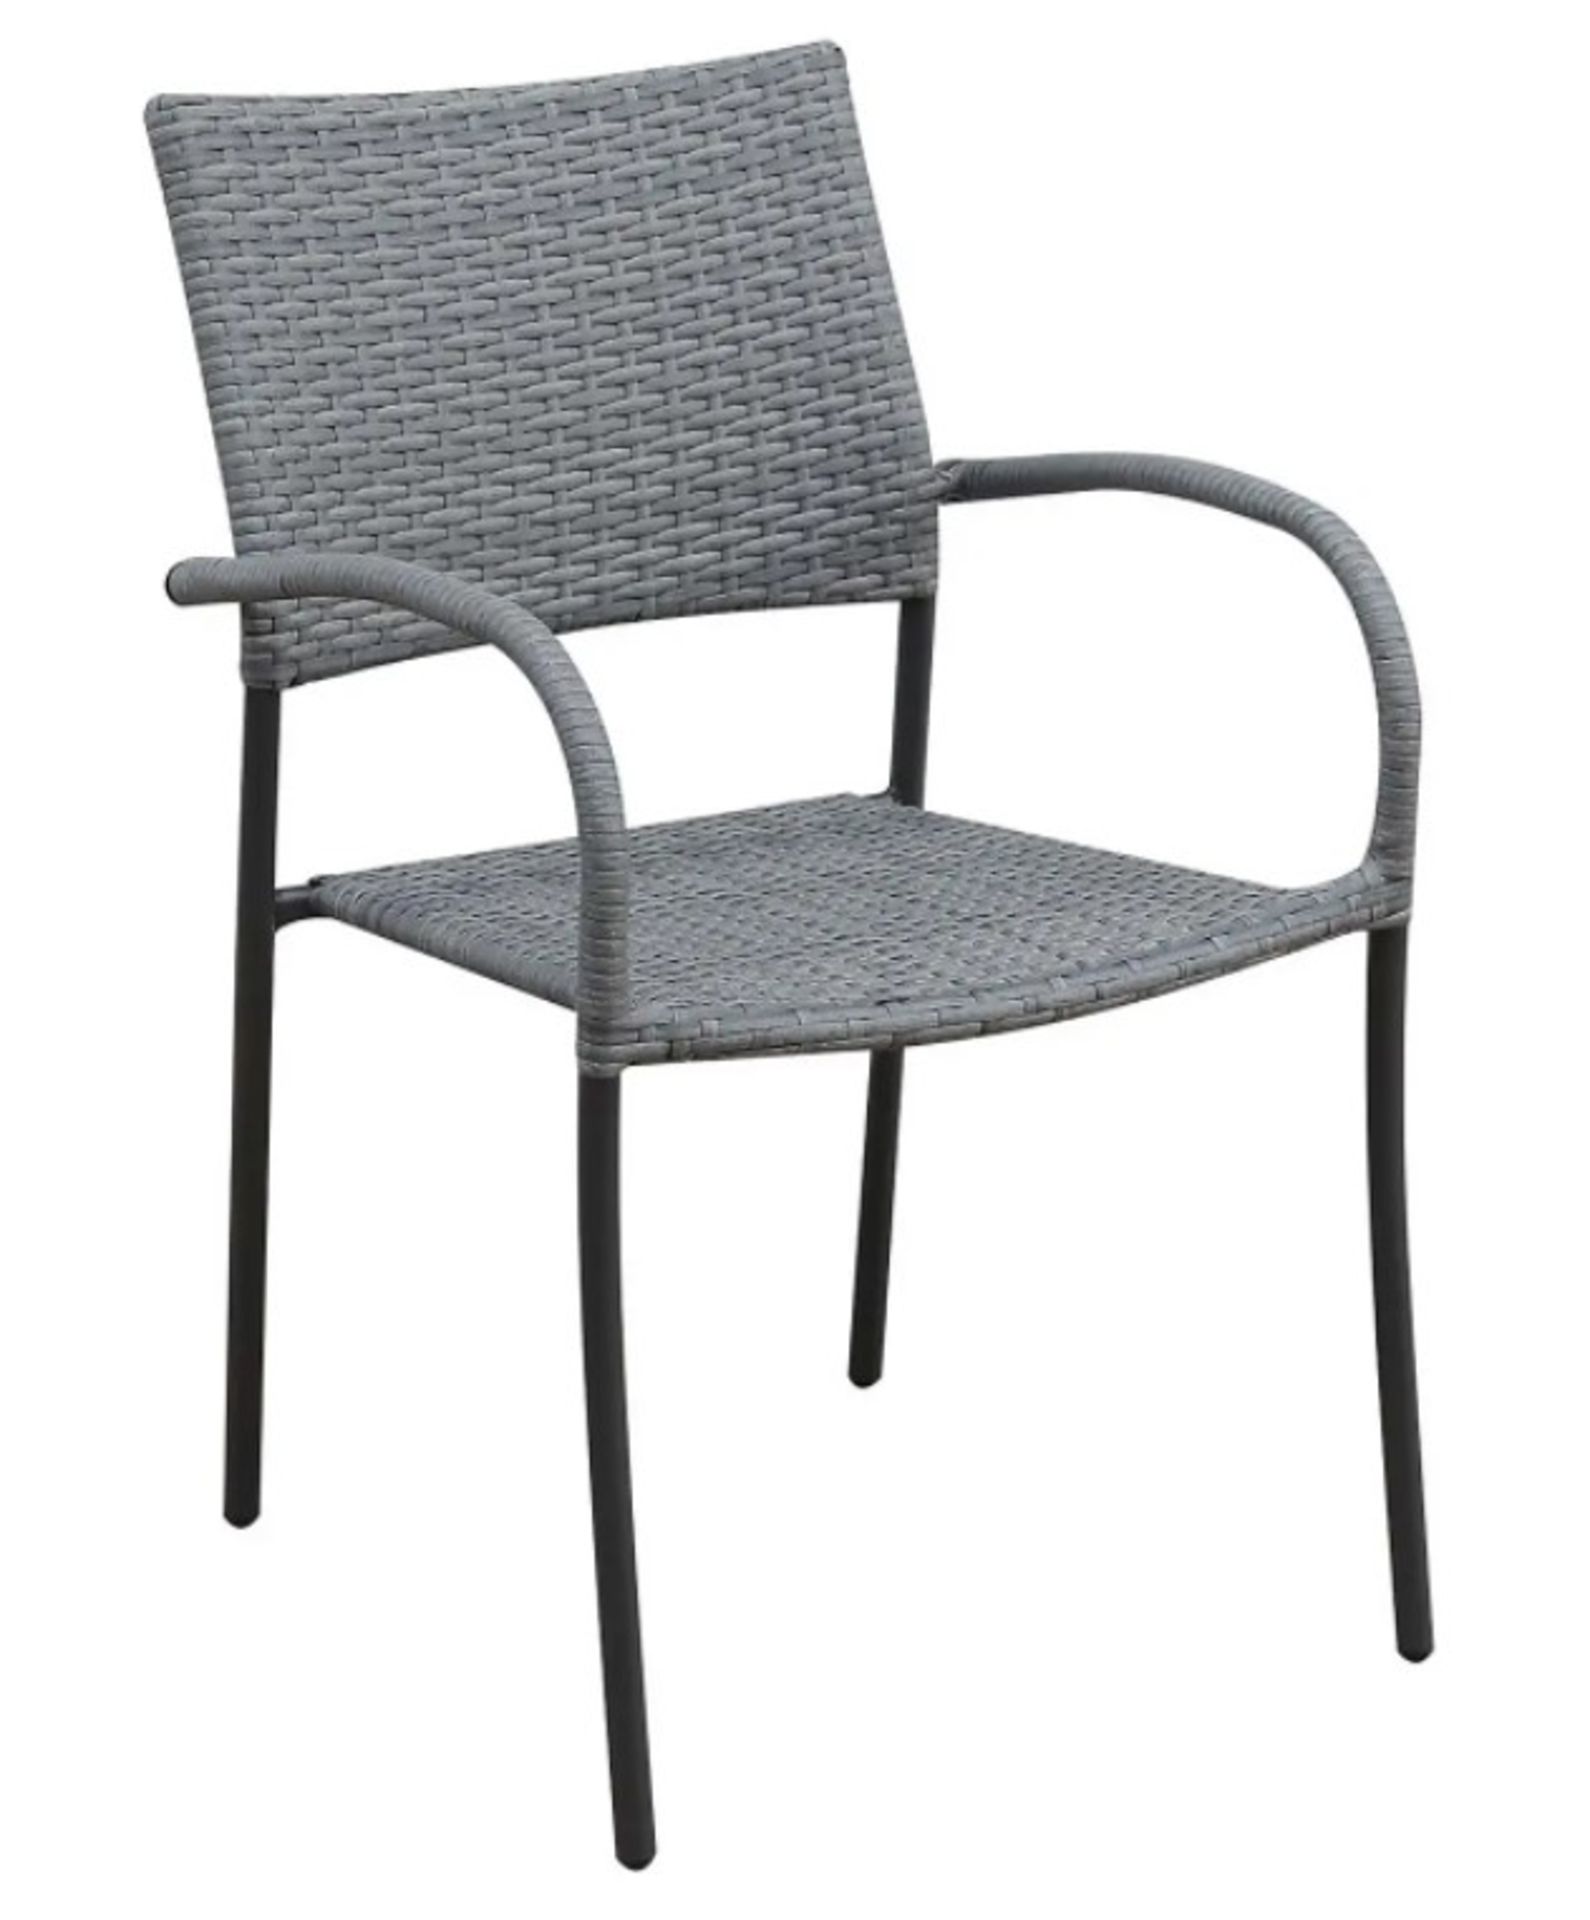 (58/5E) 7x Bambrick Stacking Chair Grey. (All Units Appears As New). - Image 3 of 4